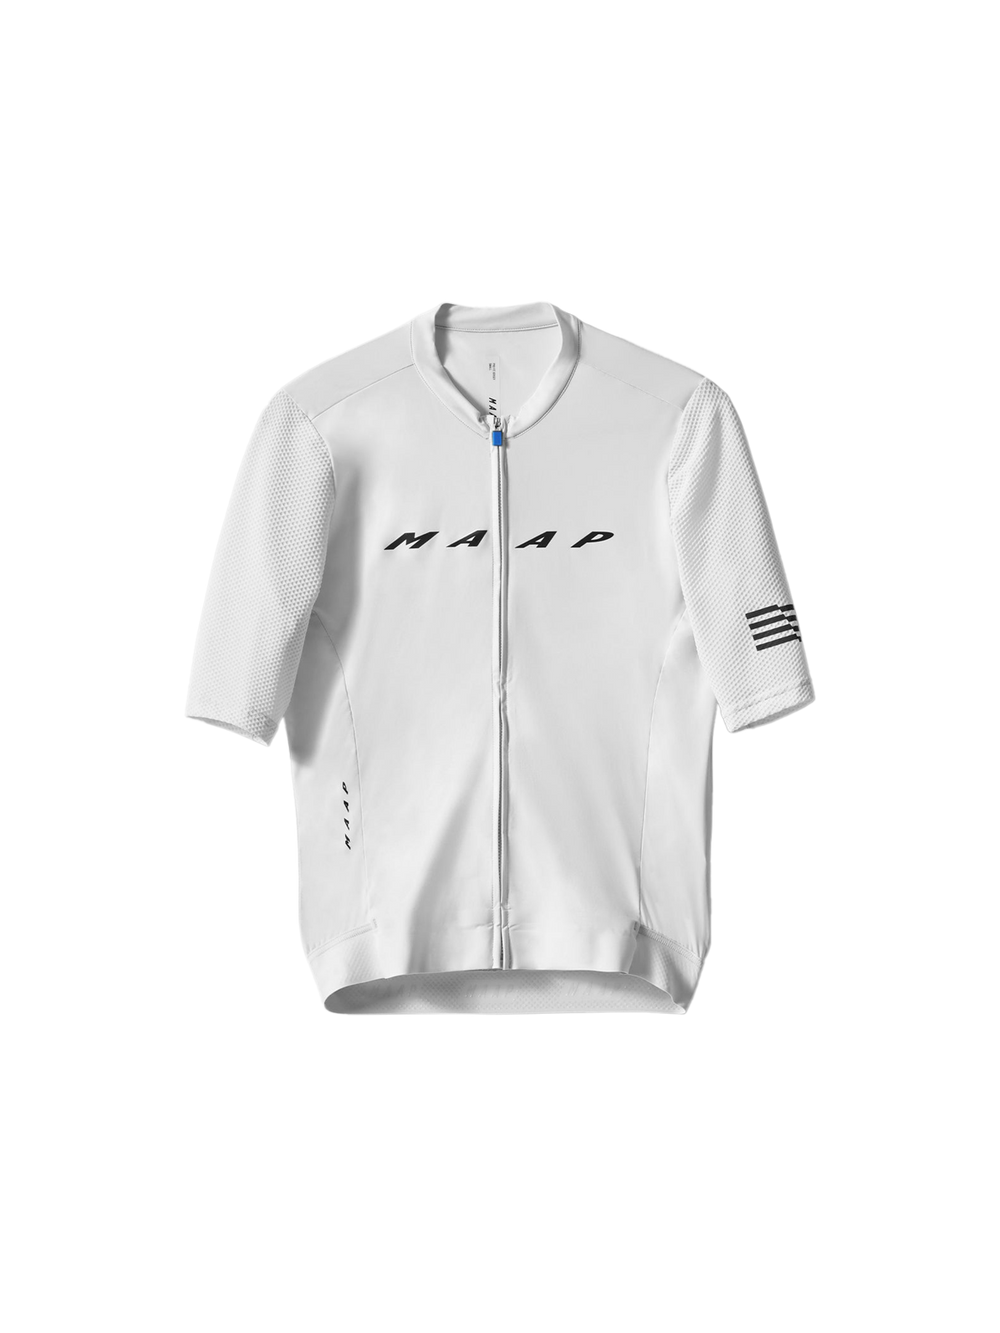 Product Image for Evade Pro Base Jersey 2.0